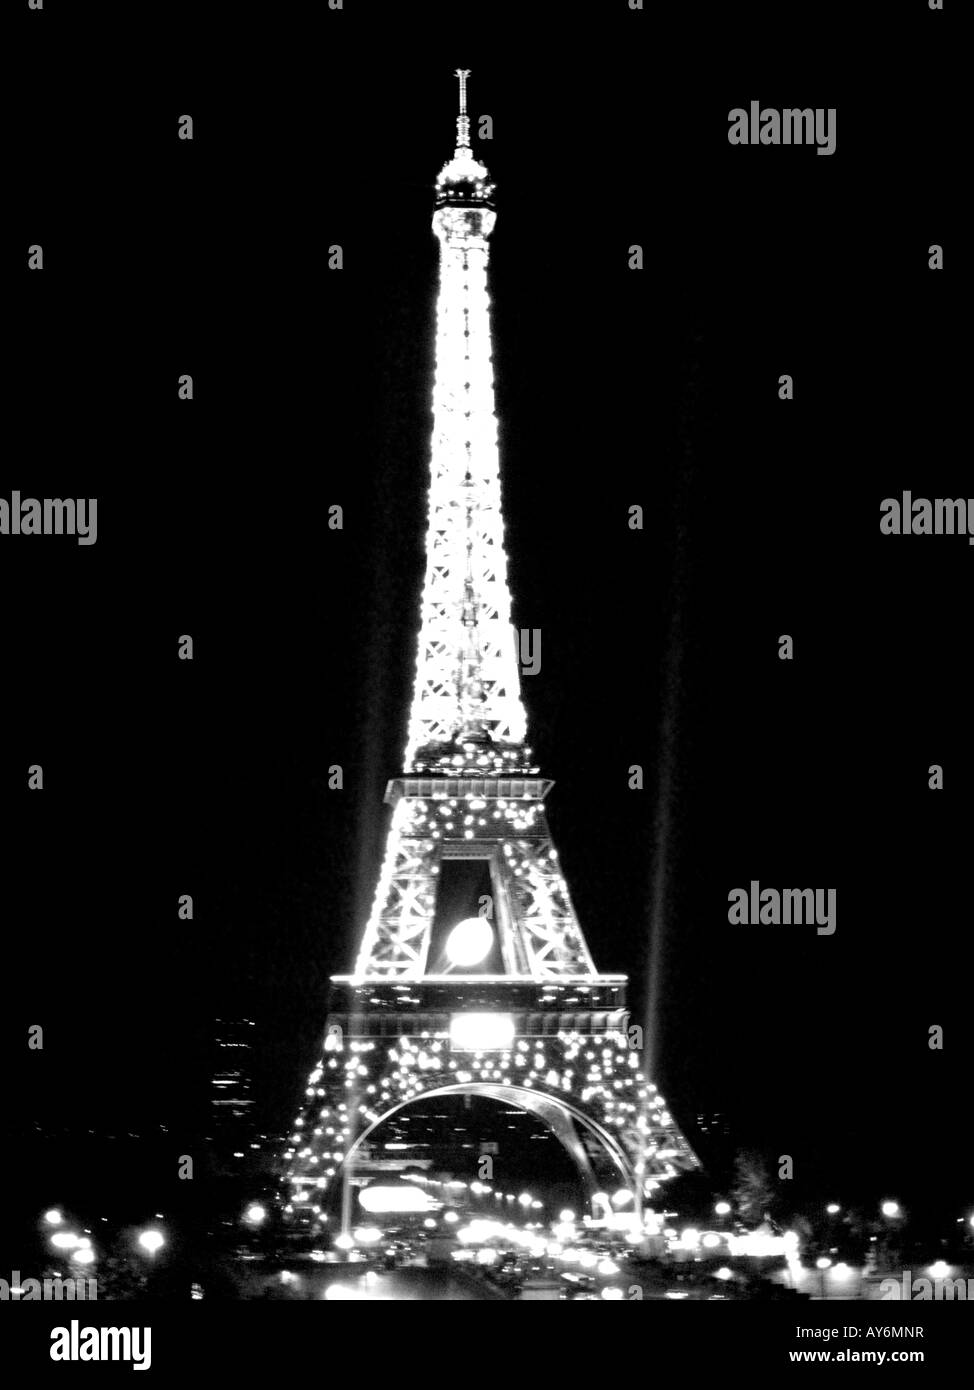 Black and White Desaturated Image of The Eiffel Tower in Paris at Night During the Rugby World Cup 2007 Stock Photo